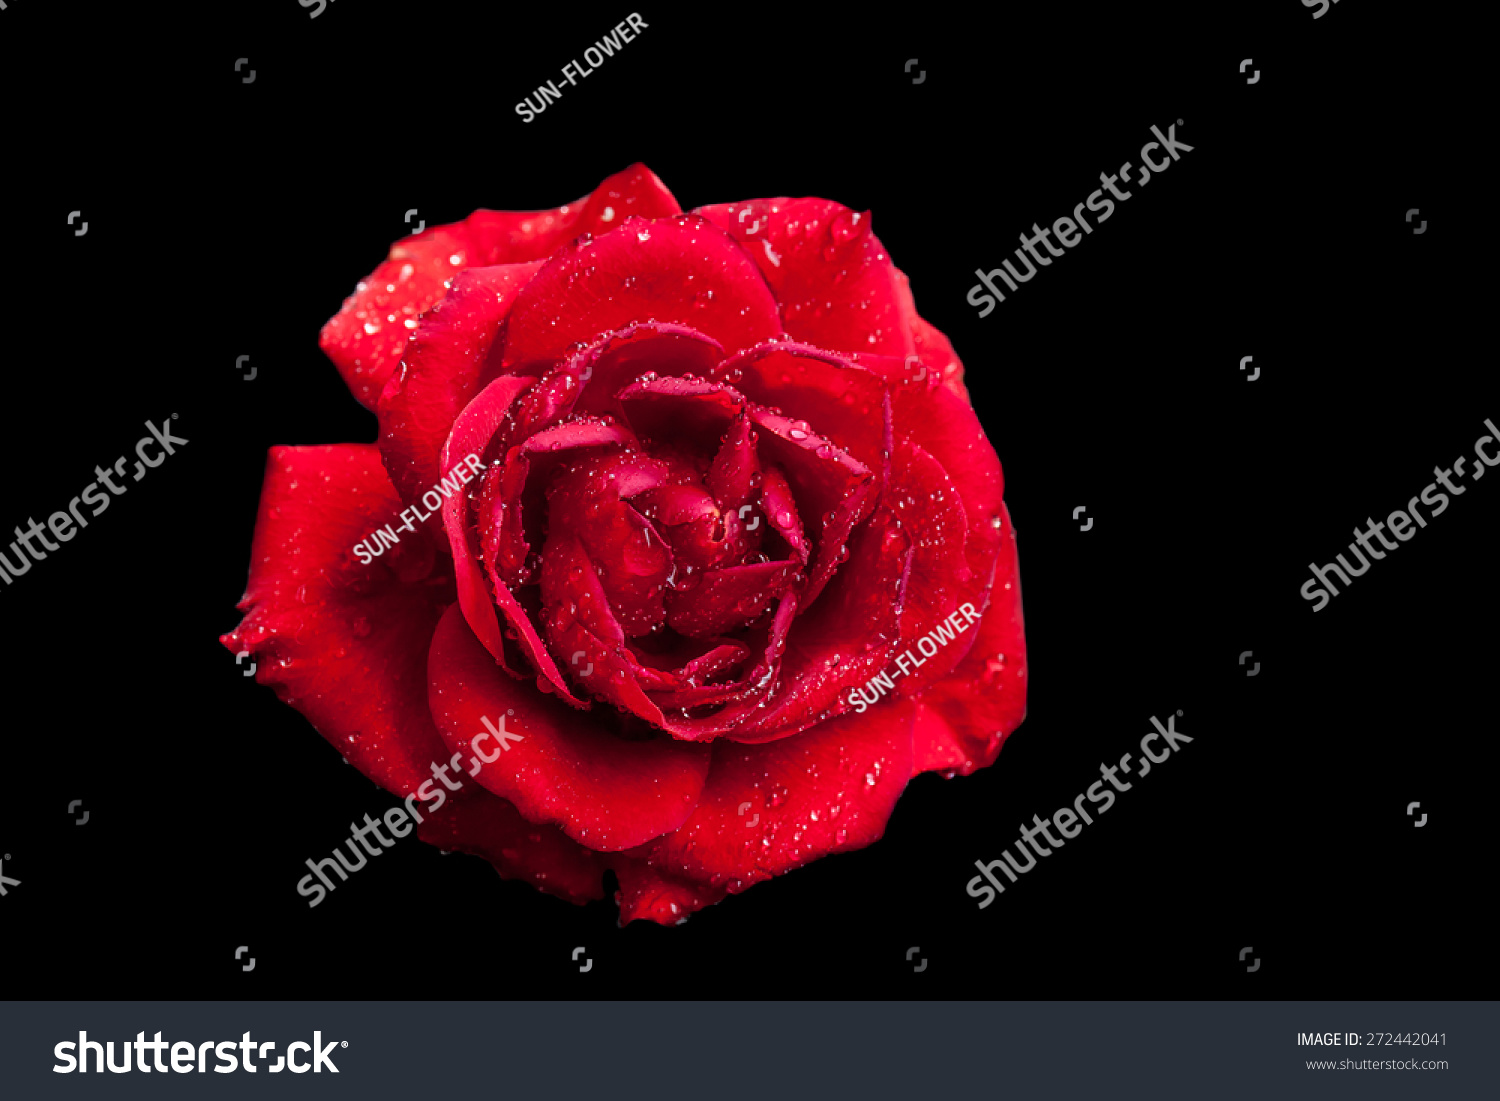 21,526 Red diamond rose Images, Stock Photos & Vectors | Shutterstock